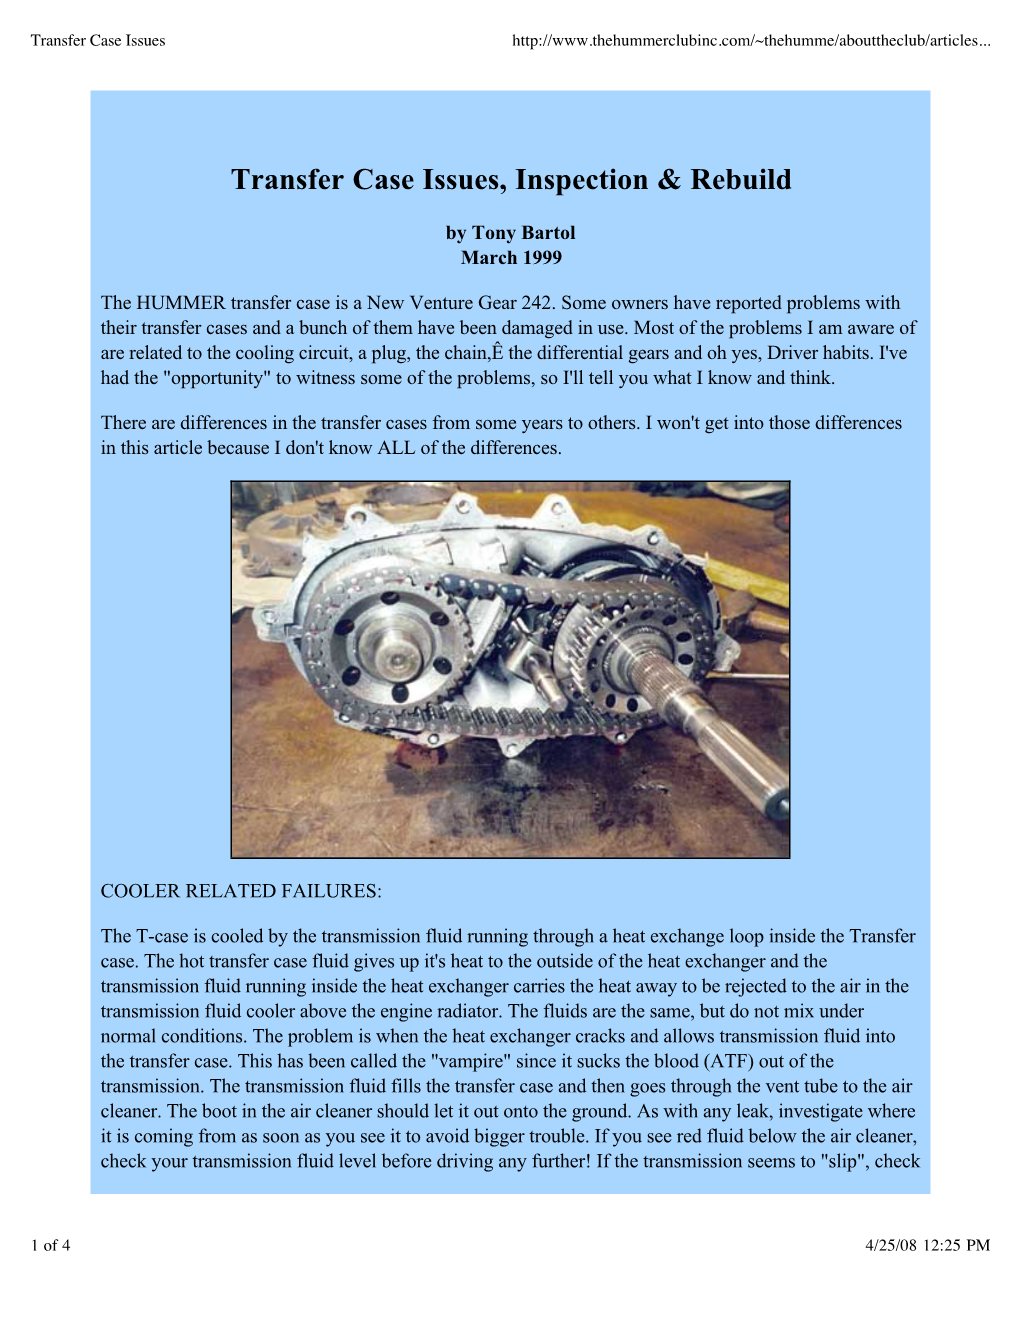 Transfer Case Issues, Inspection & Rebuild